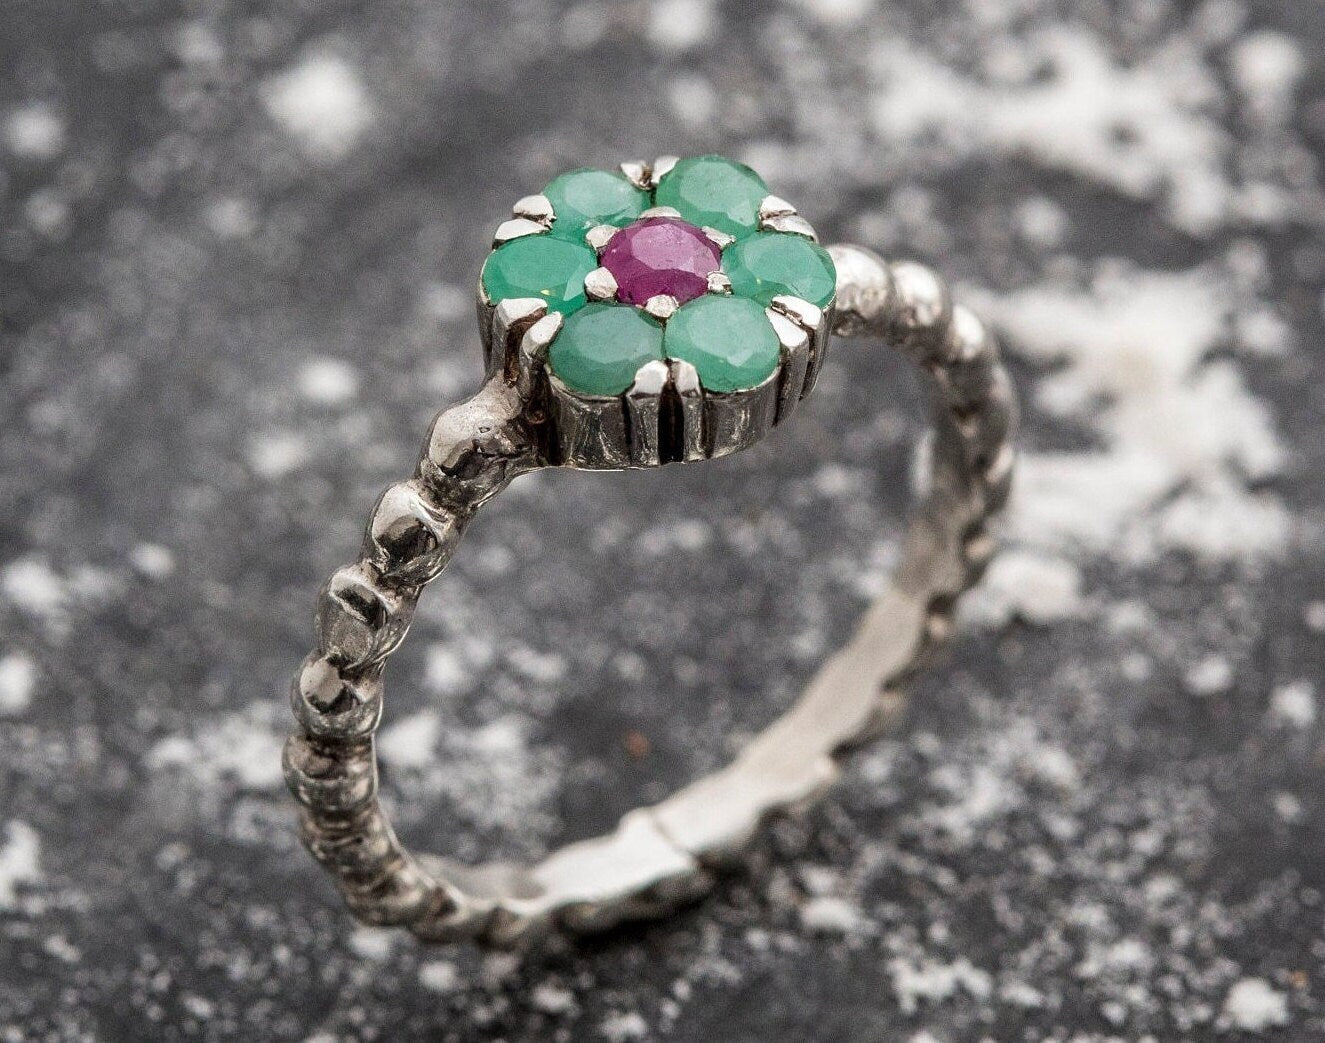 Emerald Flower Ring, Emerald Ring, Natural Emerald, Ruby, Green Emerald, May Birthstone, Unique Ring, Solid Silver Ring, Green Ring, Emerald